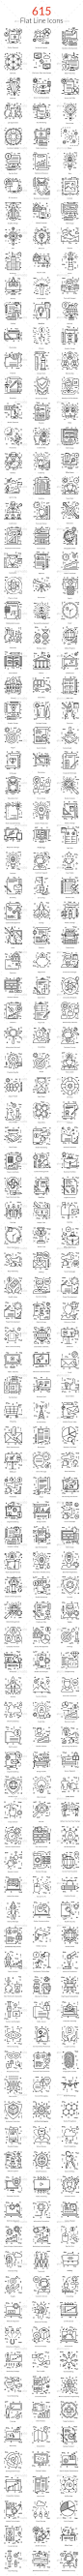 615 Flat Line Icons Design Template - Icons Design Template Vector EPS, AI Illustrator. Download here: https://graphicriver.net/item/615-flat-line-icons/19339022?ref=yinkira